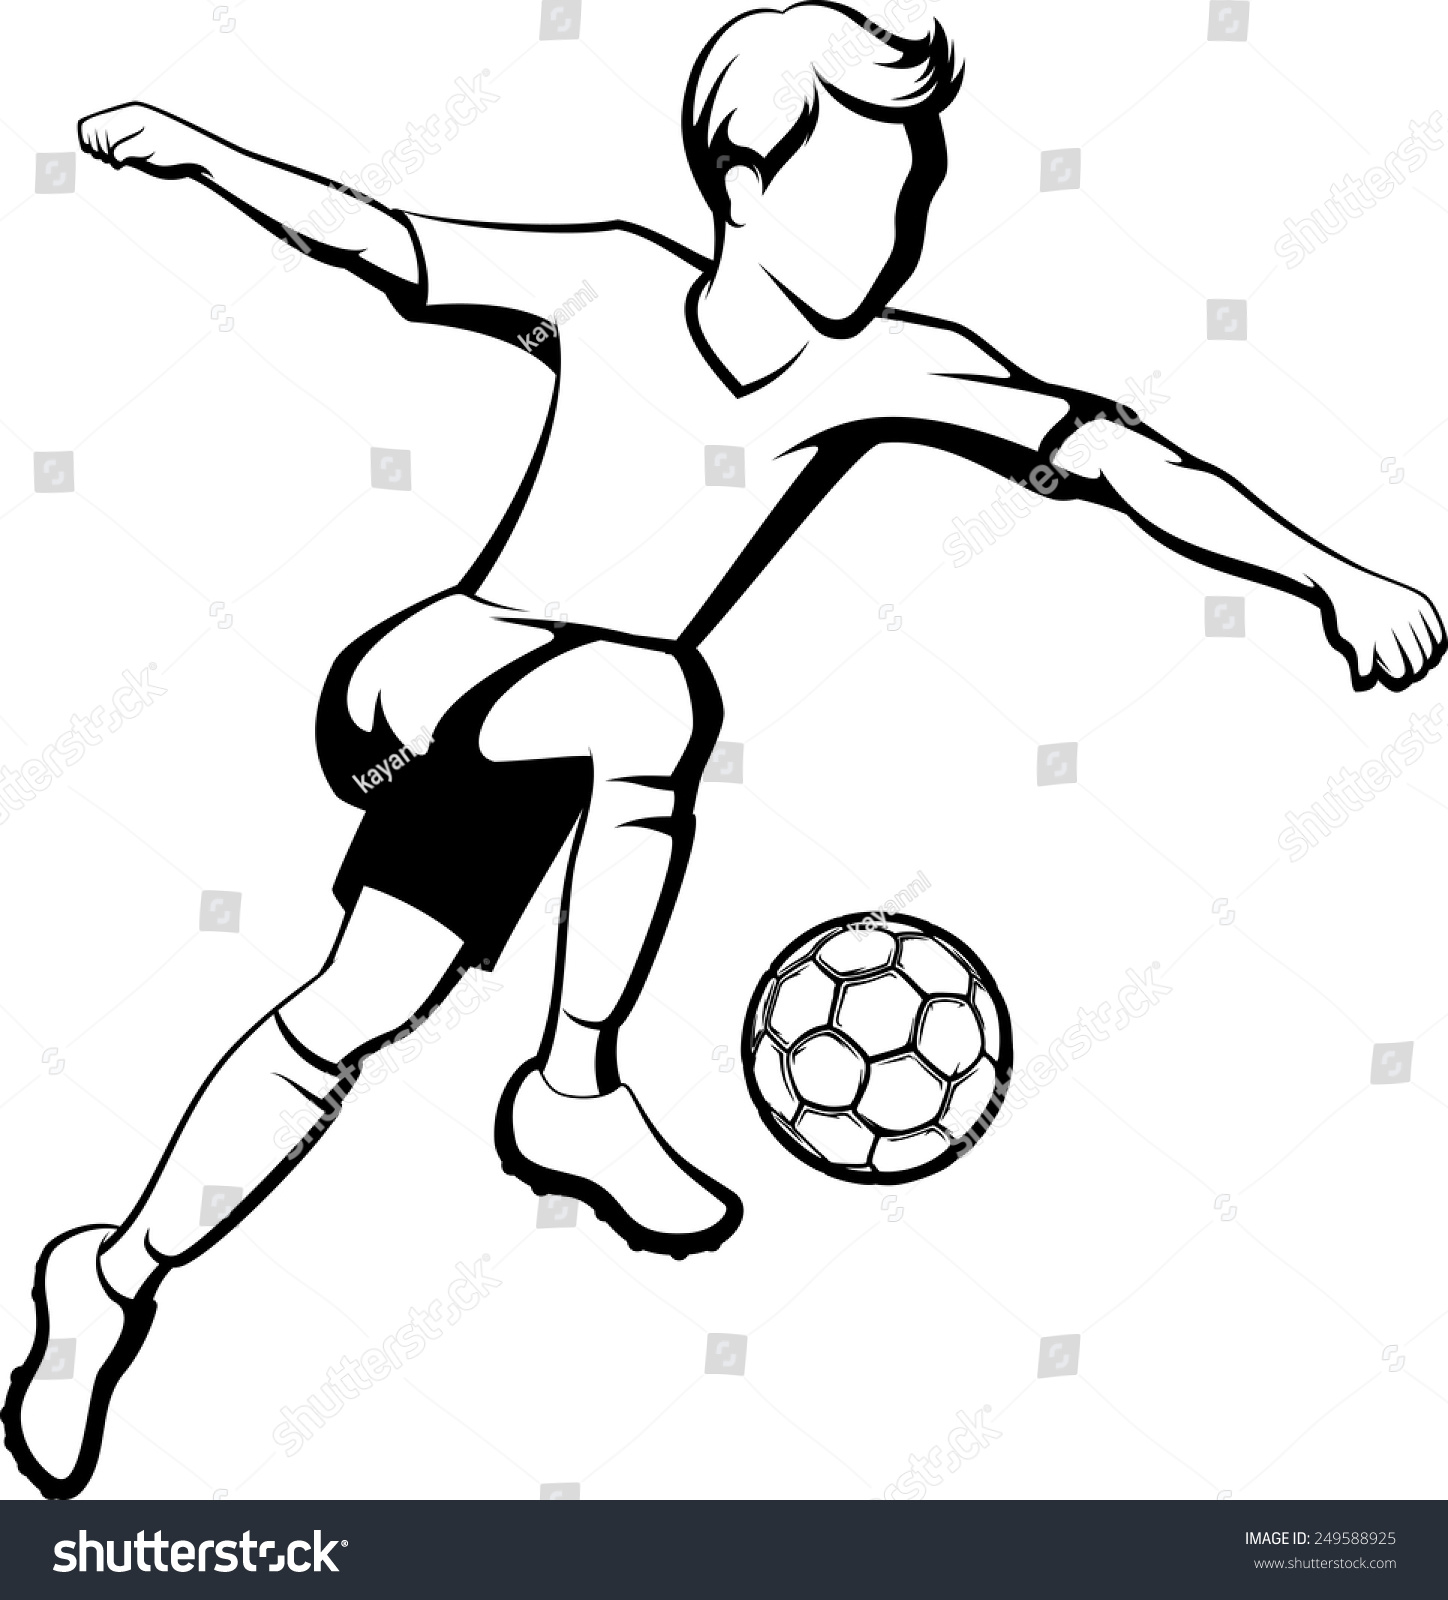 Black And White Outline Of A Boy Kicking A Soccer Ball Or Football